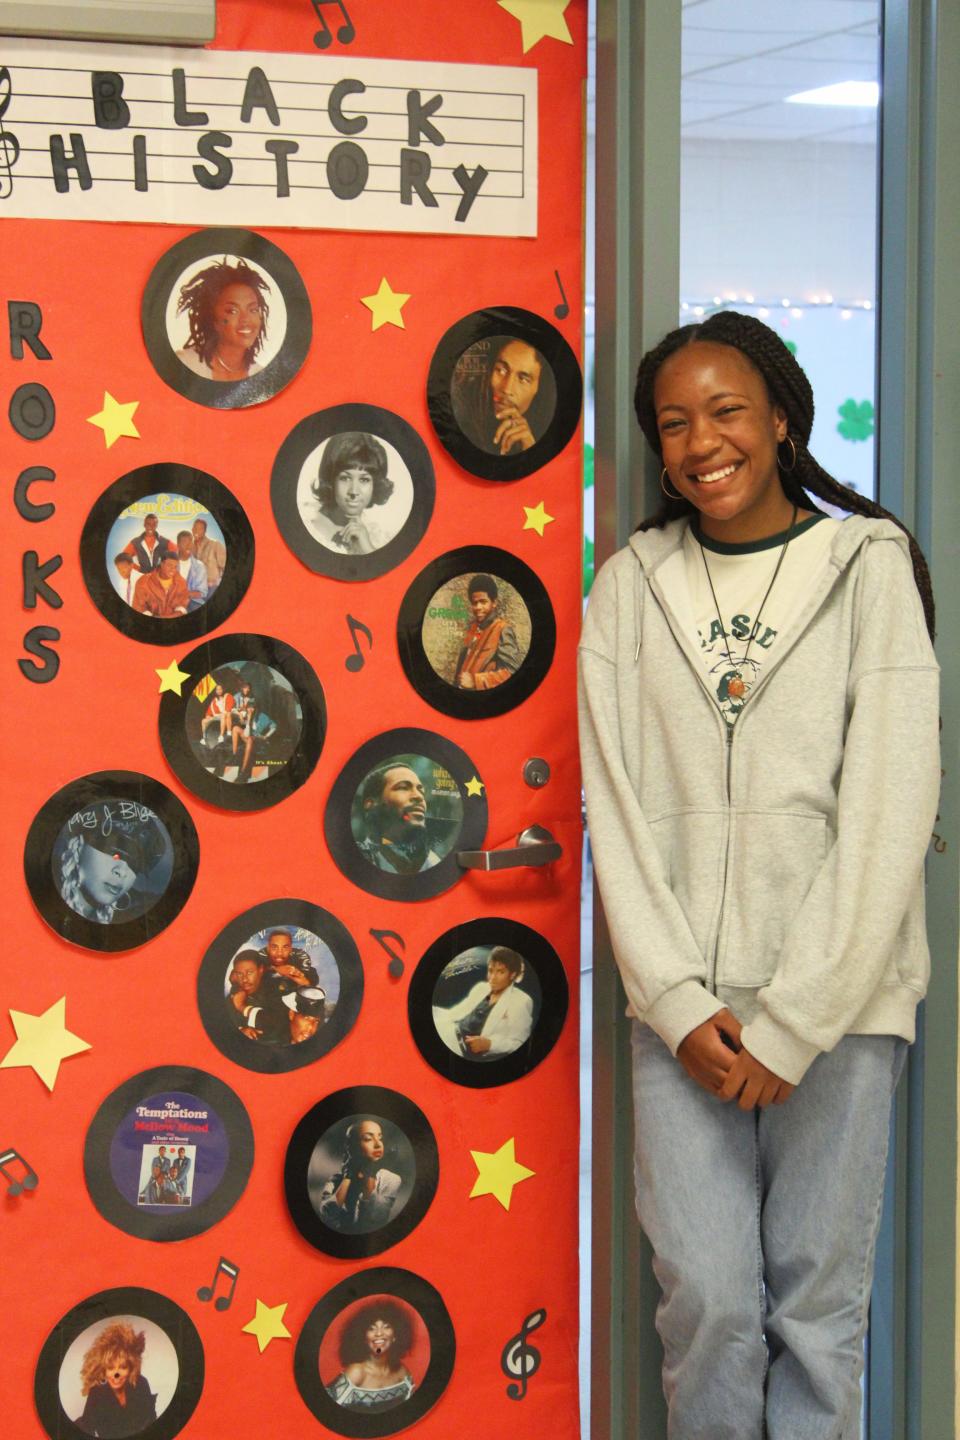 Barnstable High School student Kaylee McFarland, 13, a pianist and a singer, based her classroom door display on music with images of Black musicians including Marvin Gaye, Michael Jackson and Mary J. Blige.